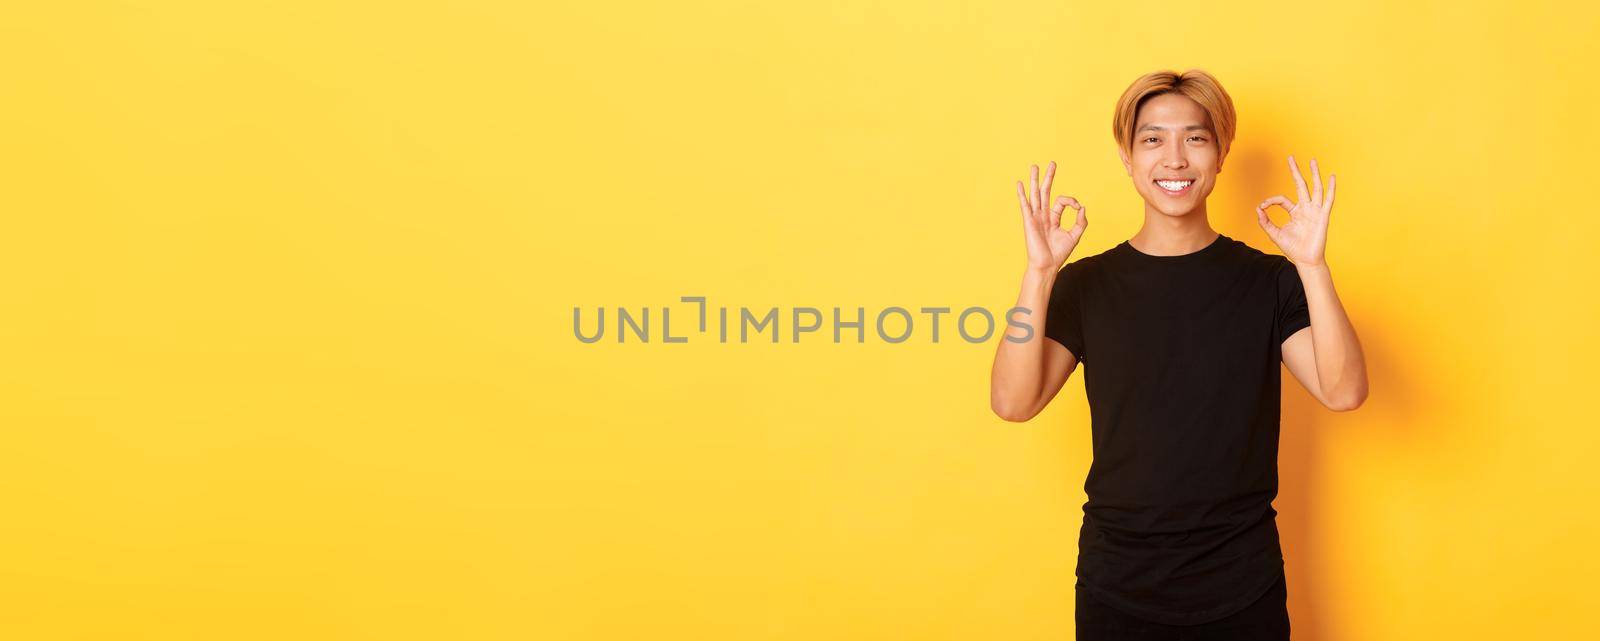 Portrait of smiling confident asian guy, looking pleased, showing okay gesture, yellow background.